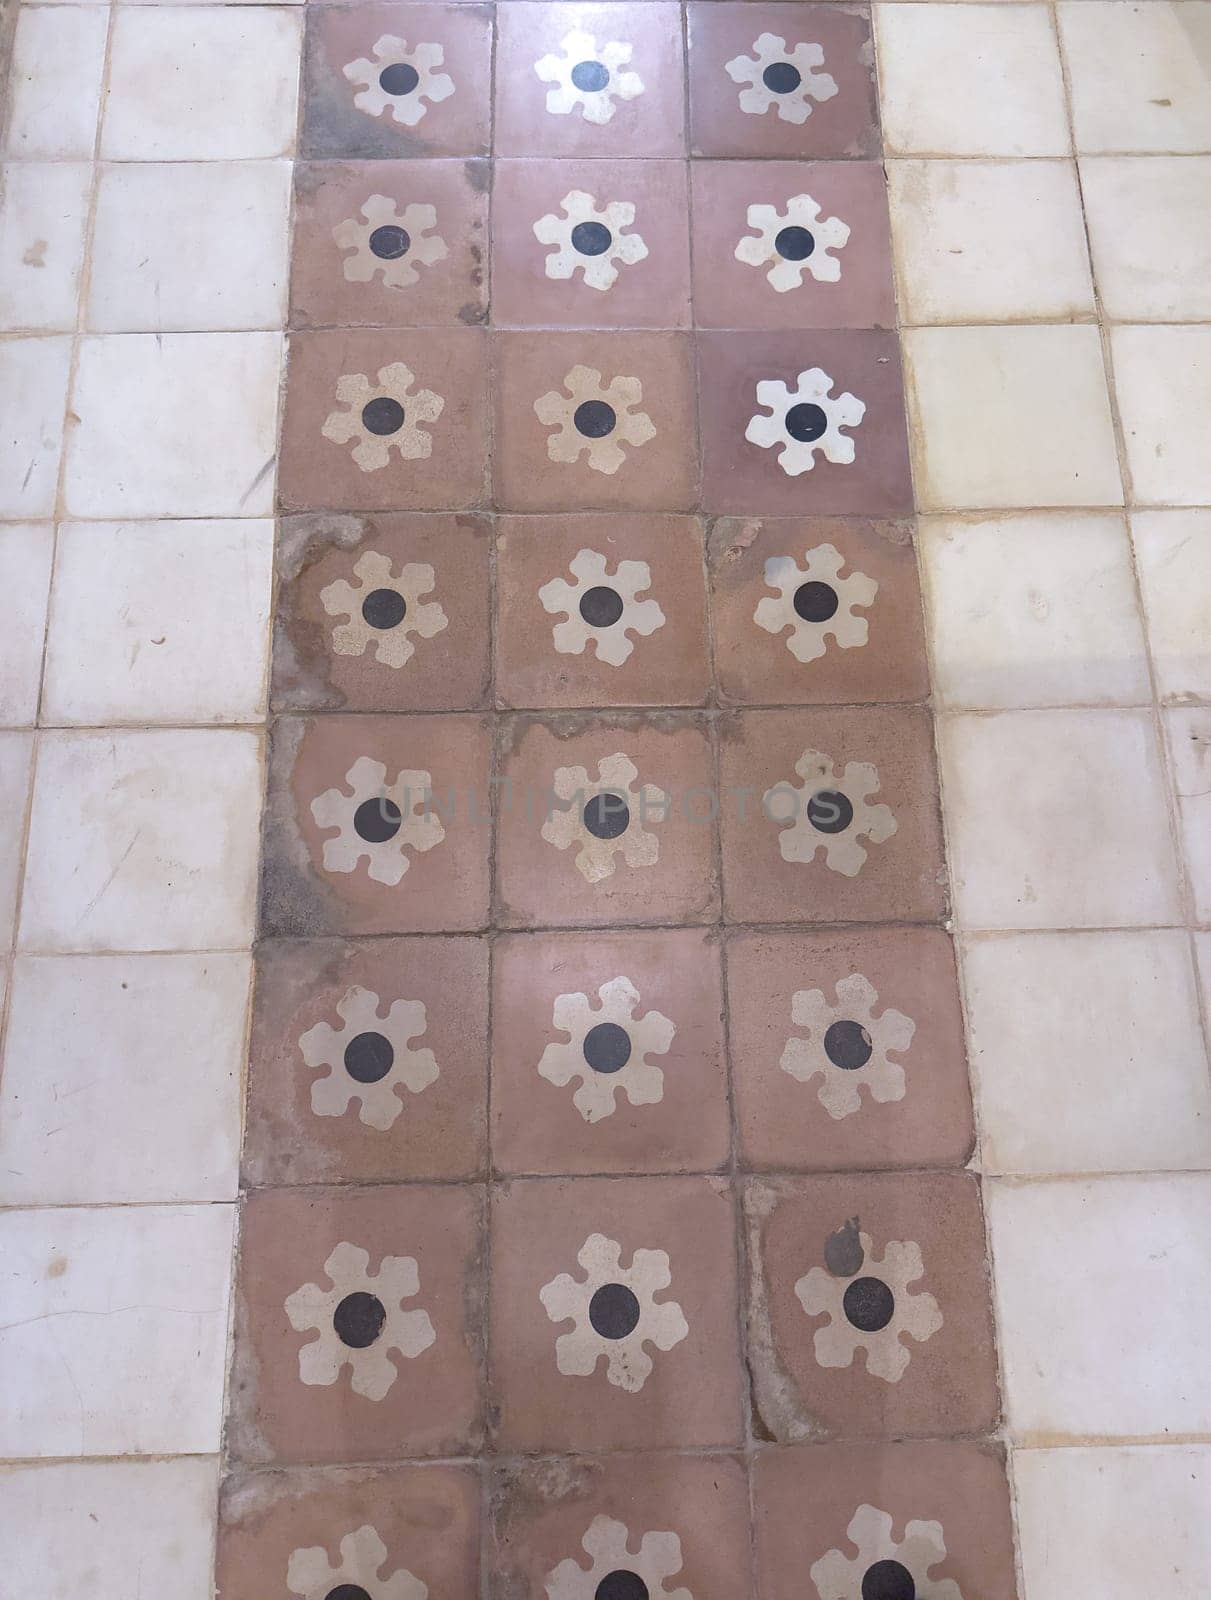 Traditional Patterned Floor Tiles in Rustic Style by FerradalFCG